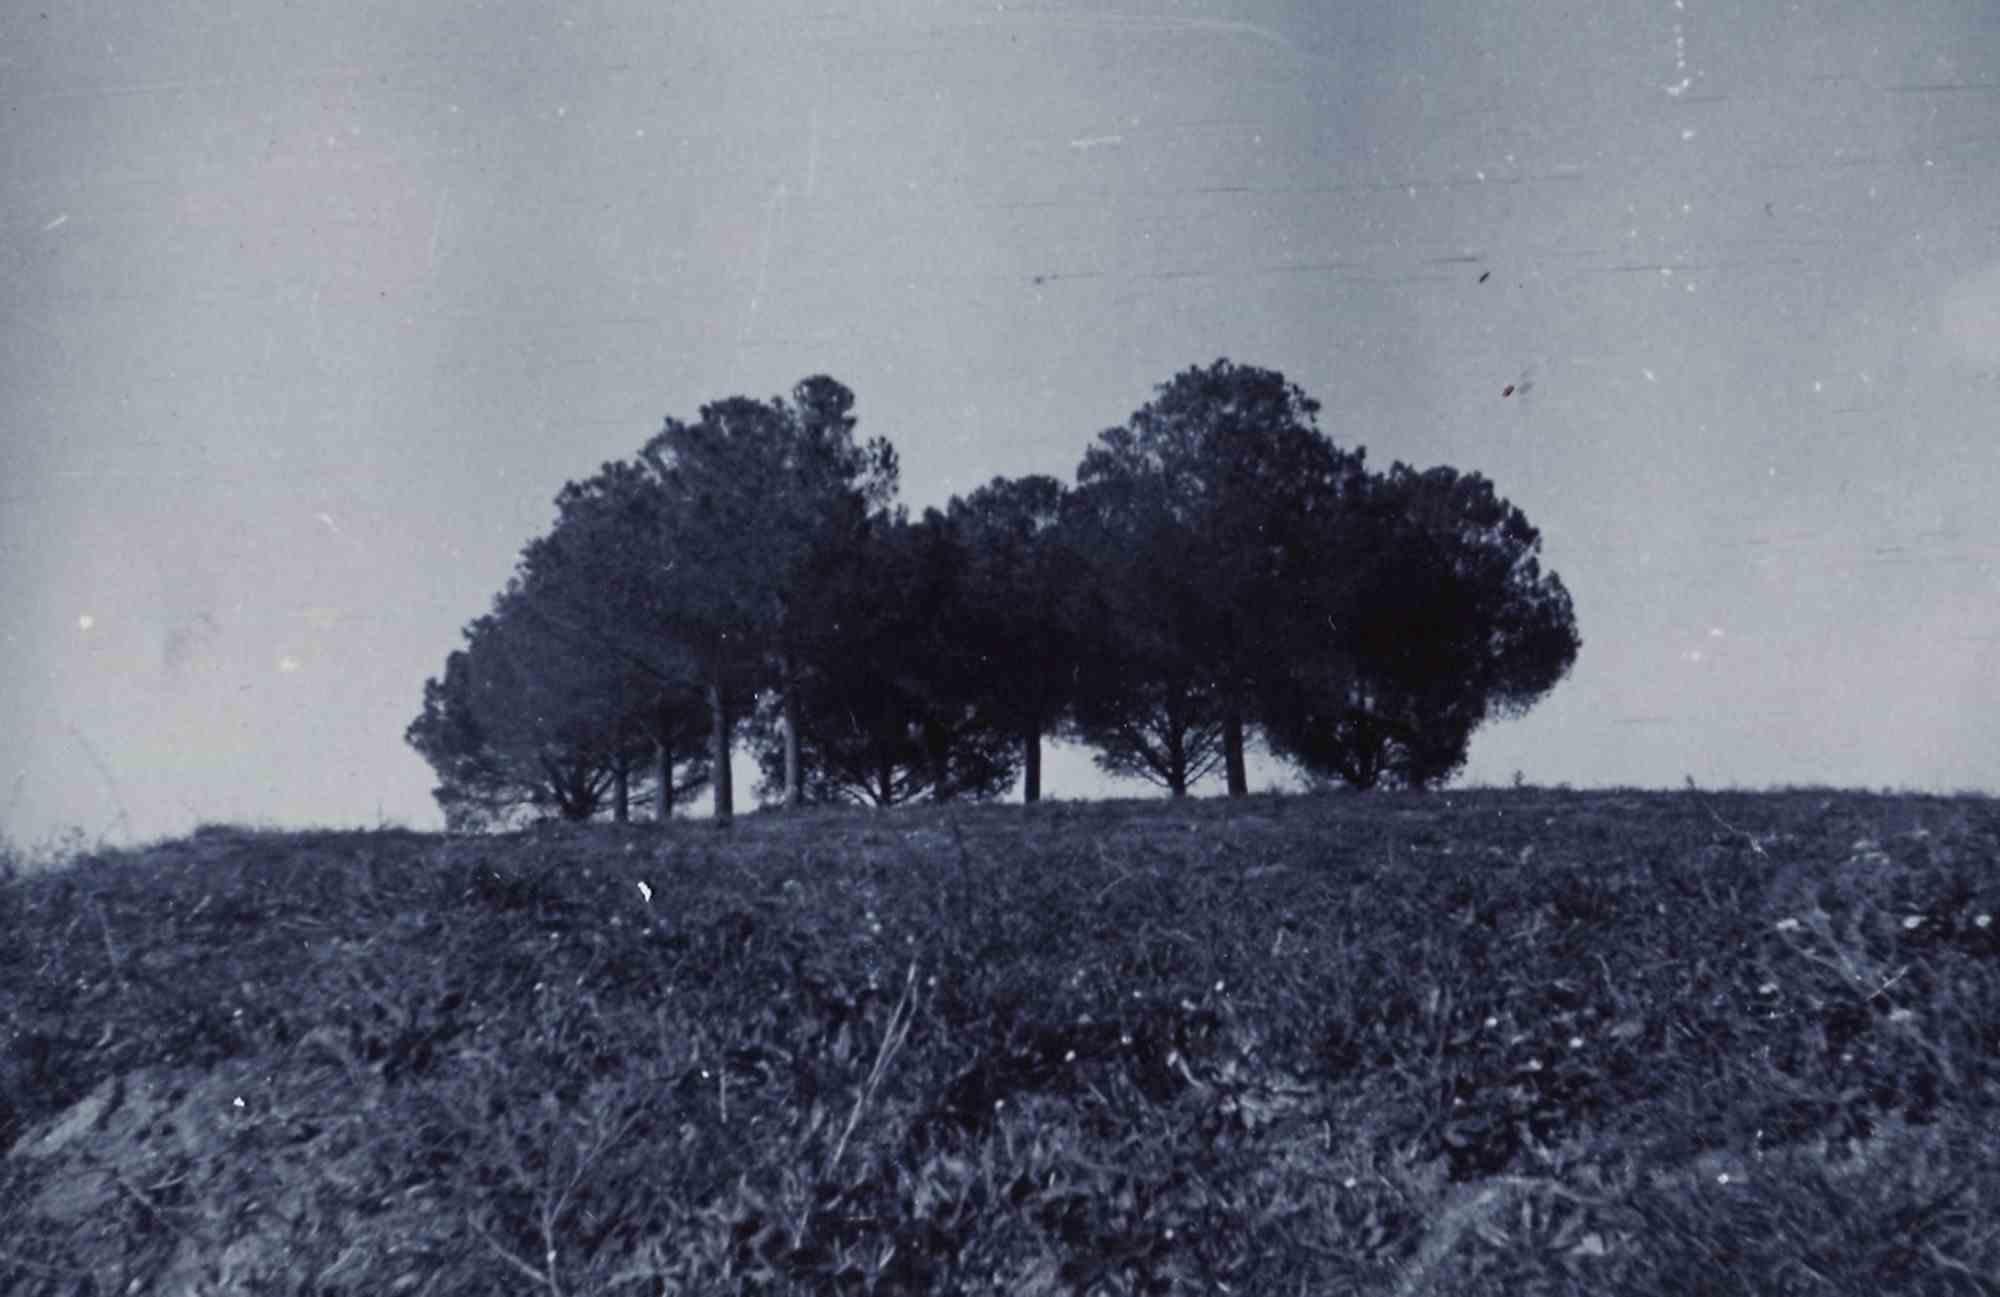 Unknown Figurative Photograph - Old days Photo - Trees Scenery - Vintage Photo - Mid-20th Century